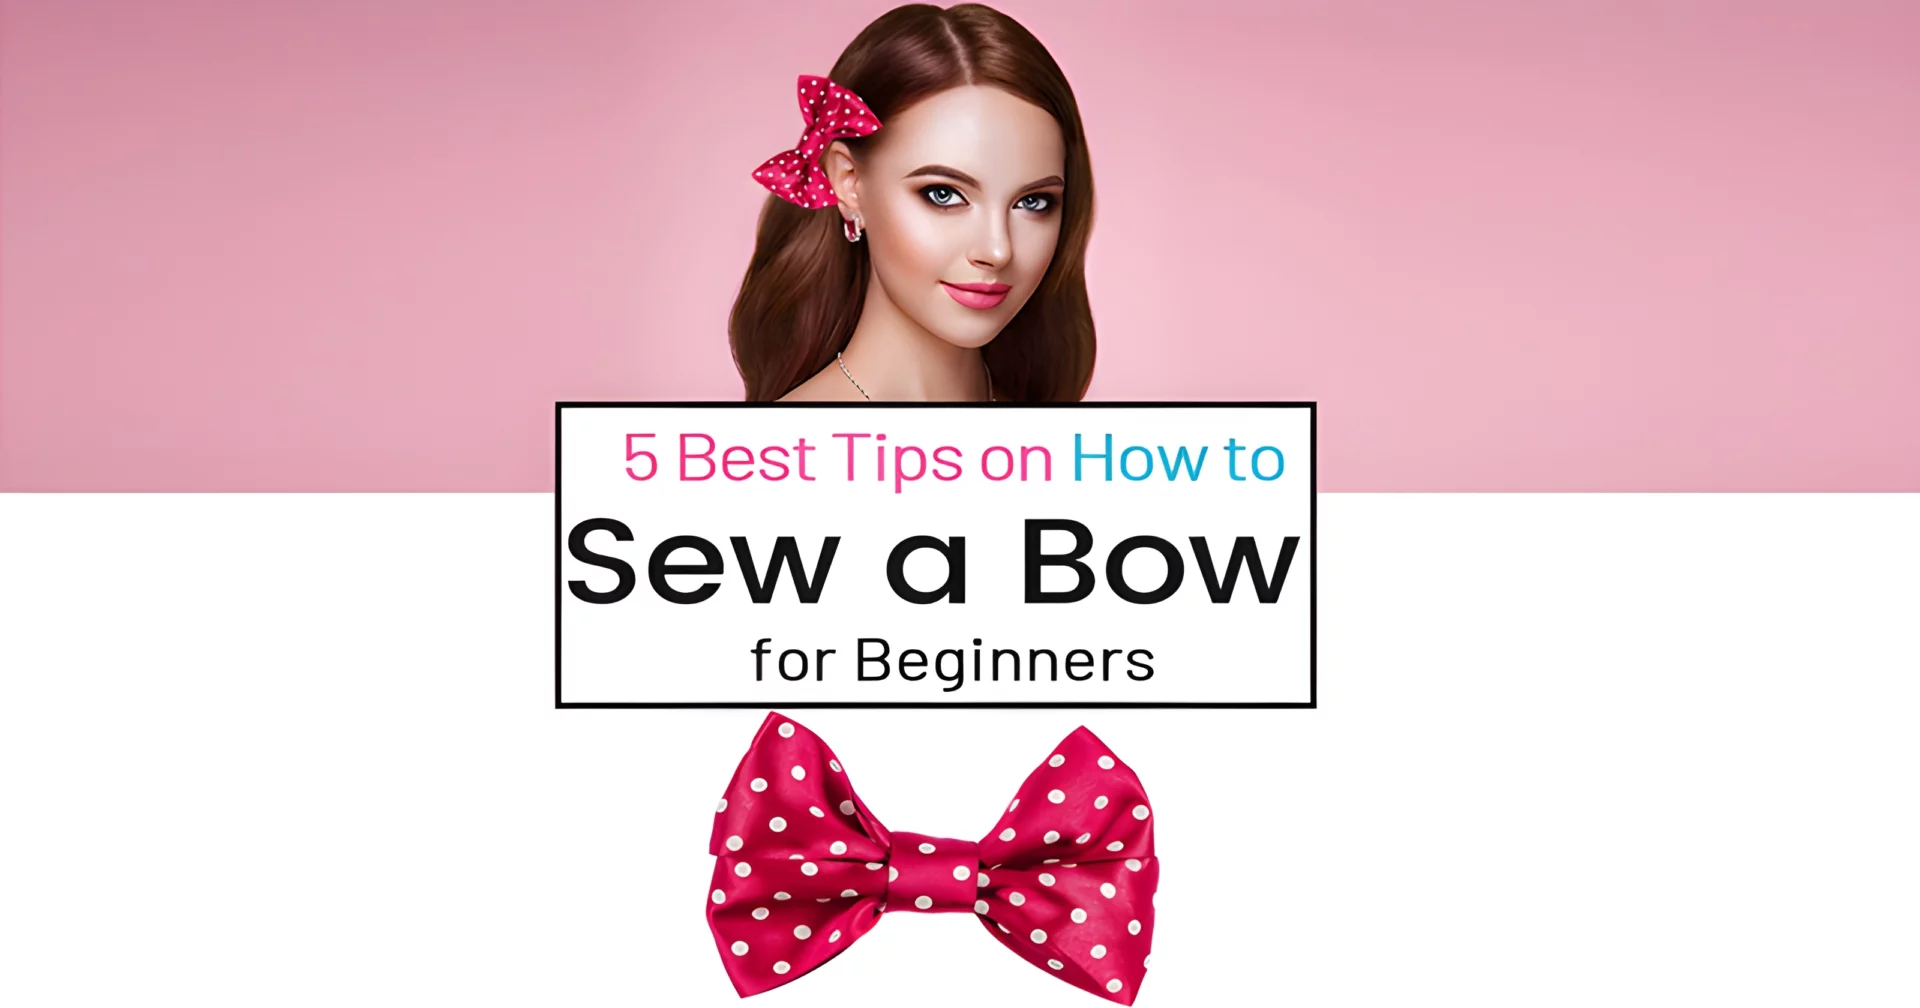 5 best tips on how to sew a bow using stretch fabric for beginners.